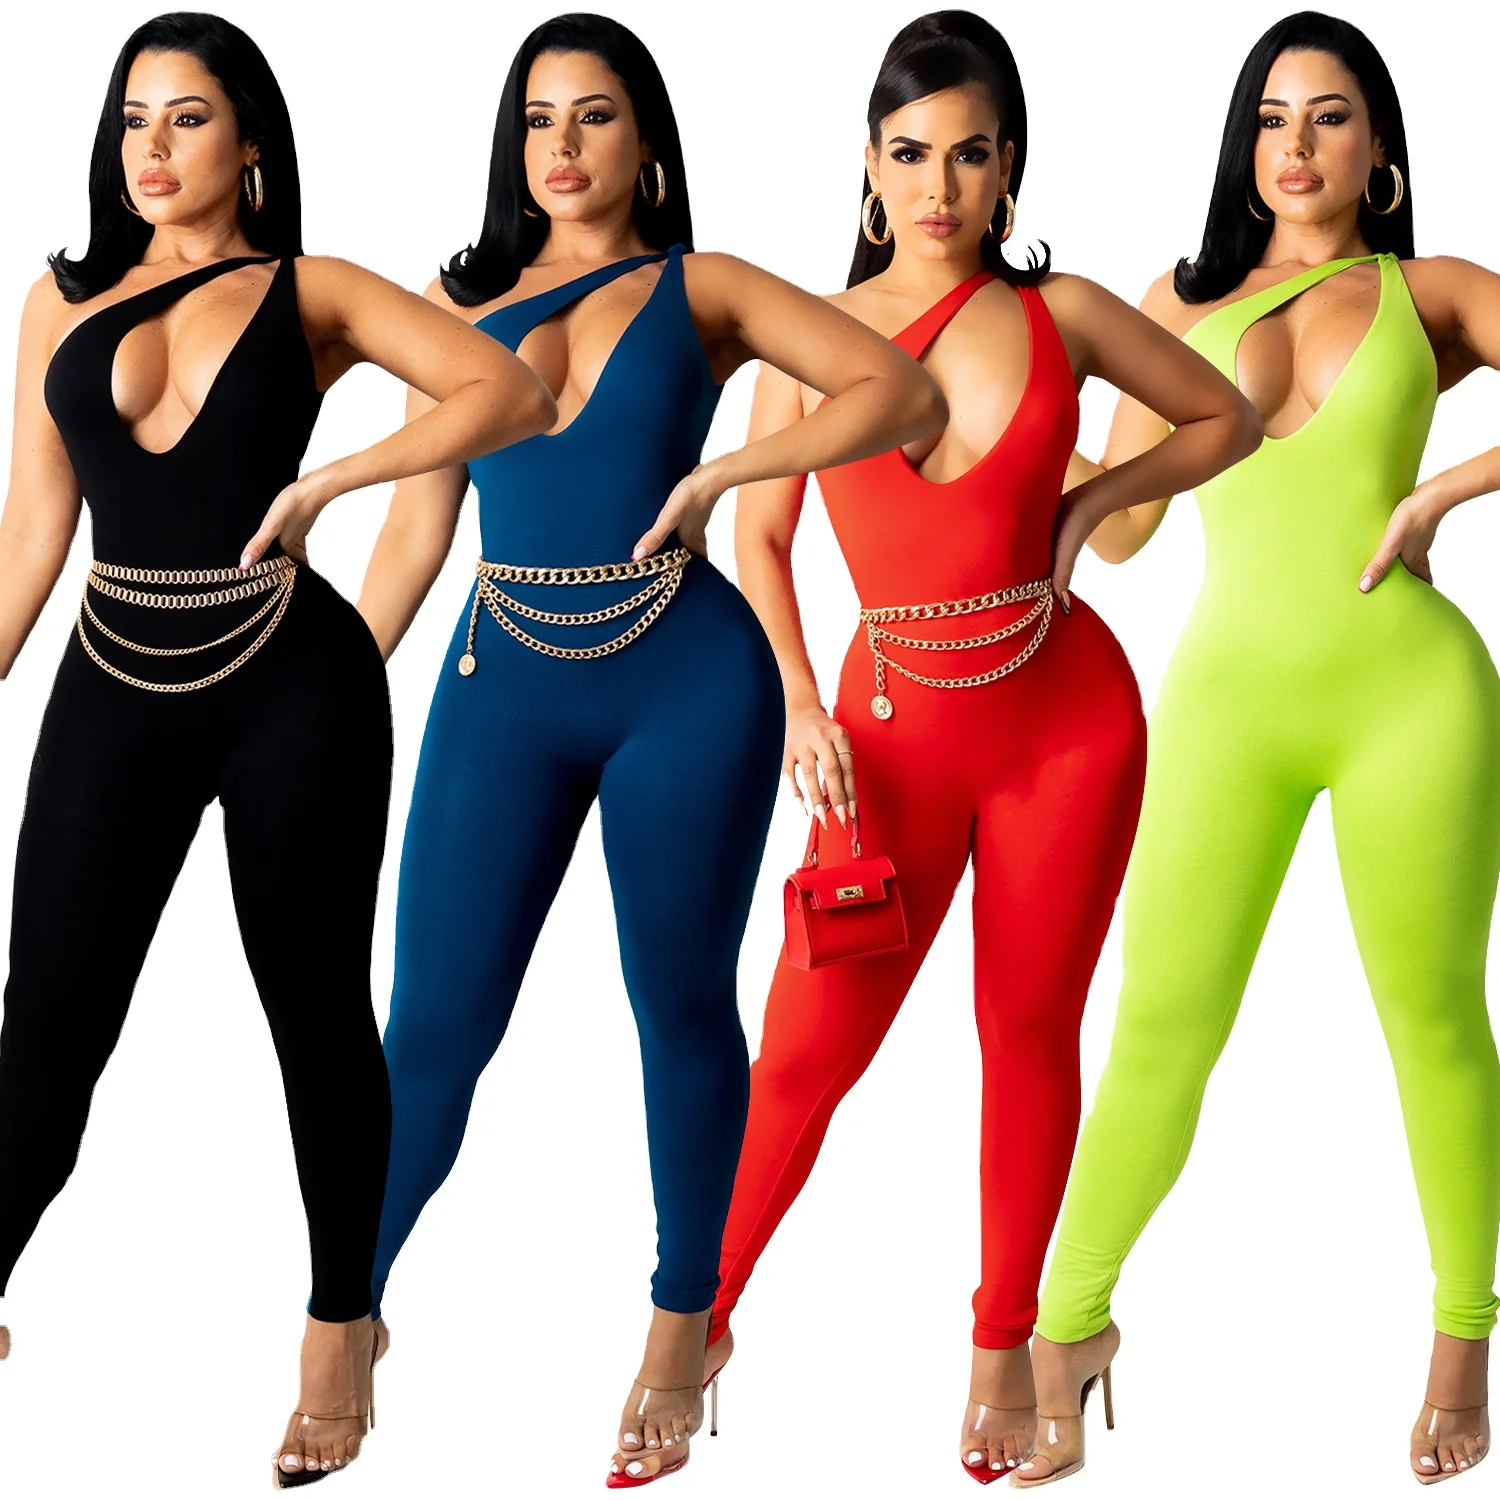 

Women Notched Bodycon Bodysuit Sexy Rompers Clubwear Playsuit Cut Out Skinny Long Pants Jumpsuits